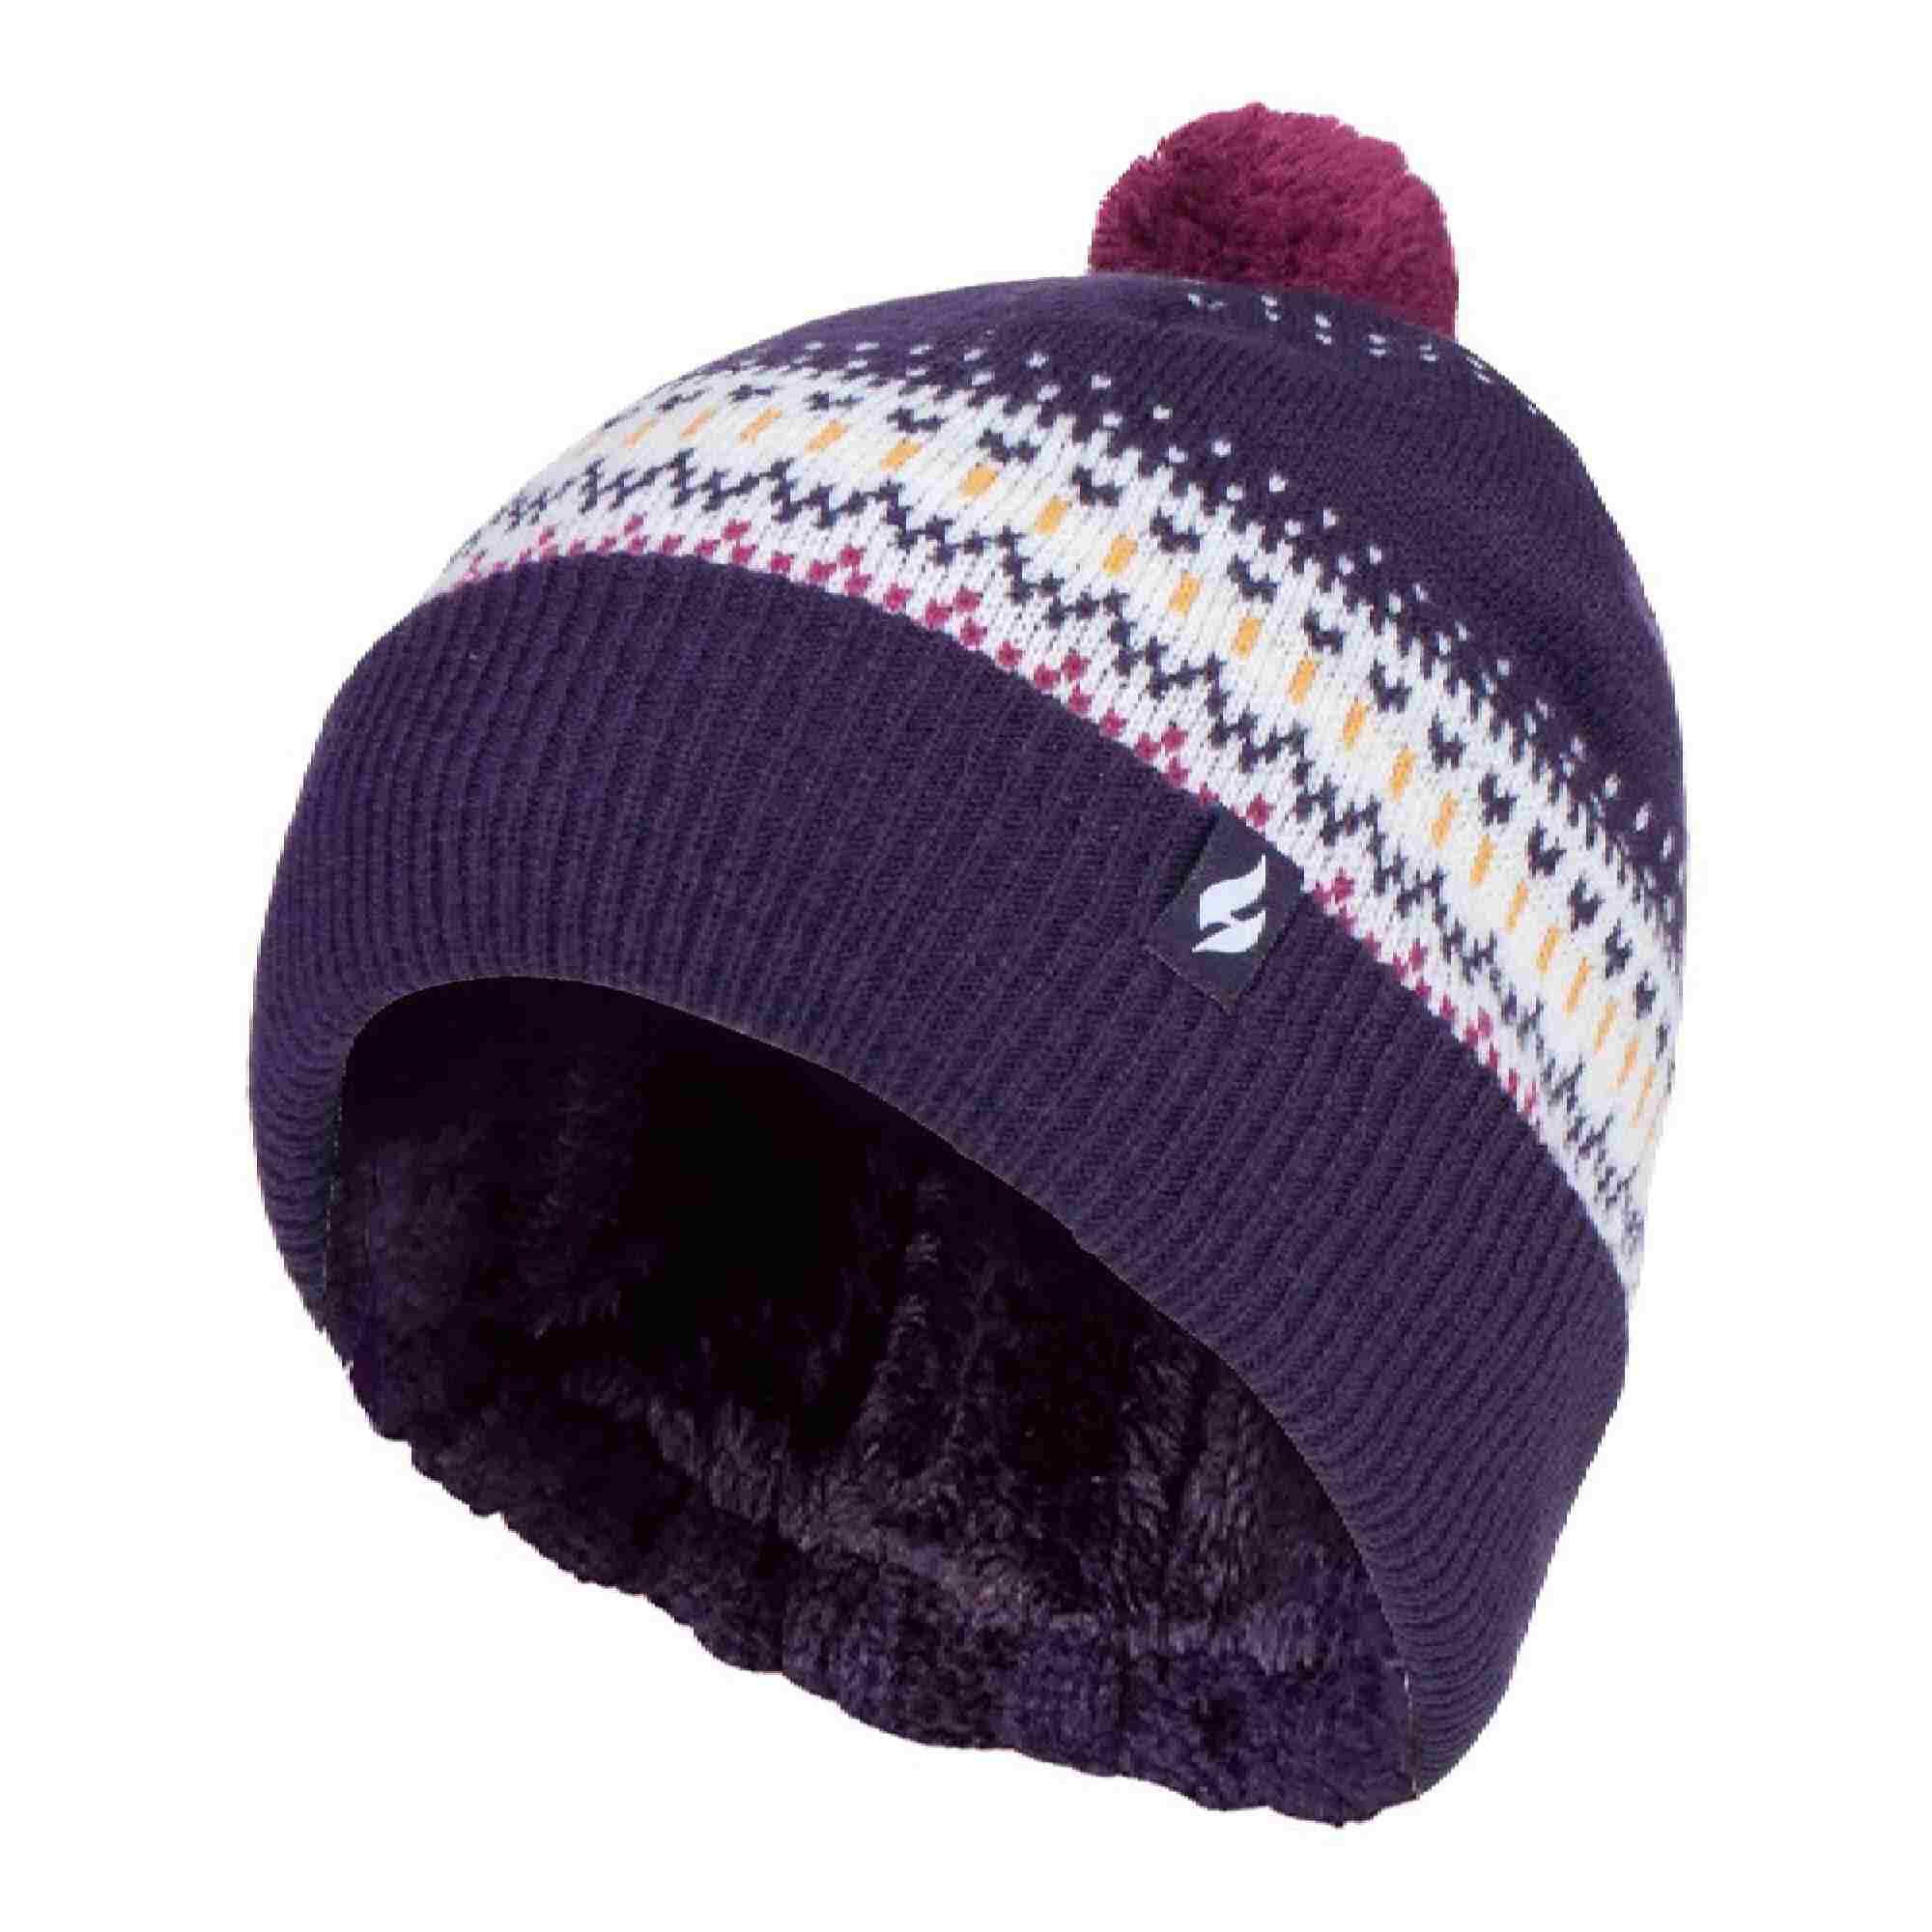 HEAT HOLDERS Ladies Knitted Beanie Bobble Hat with Pom Pom